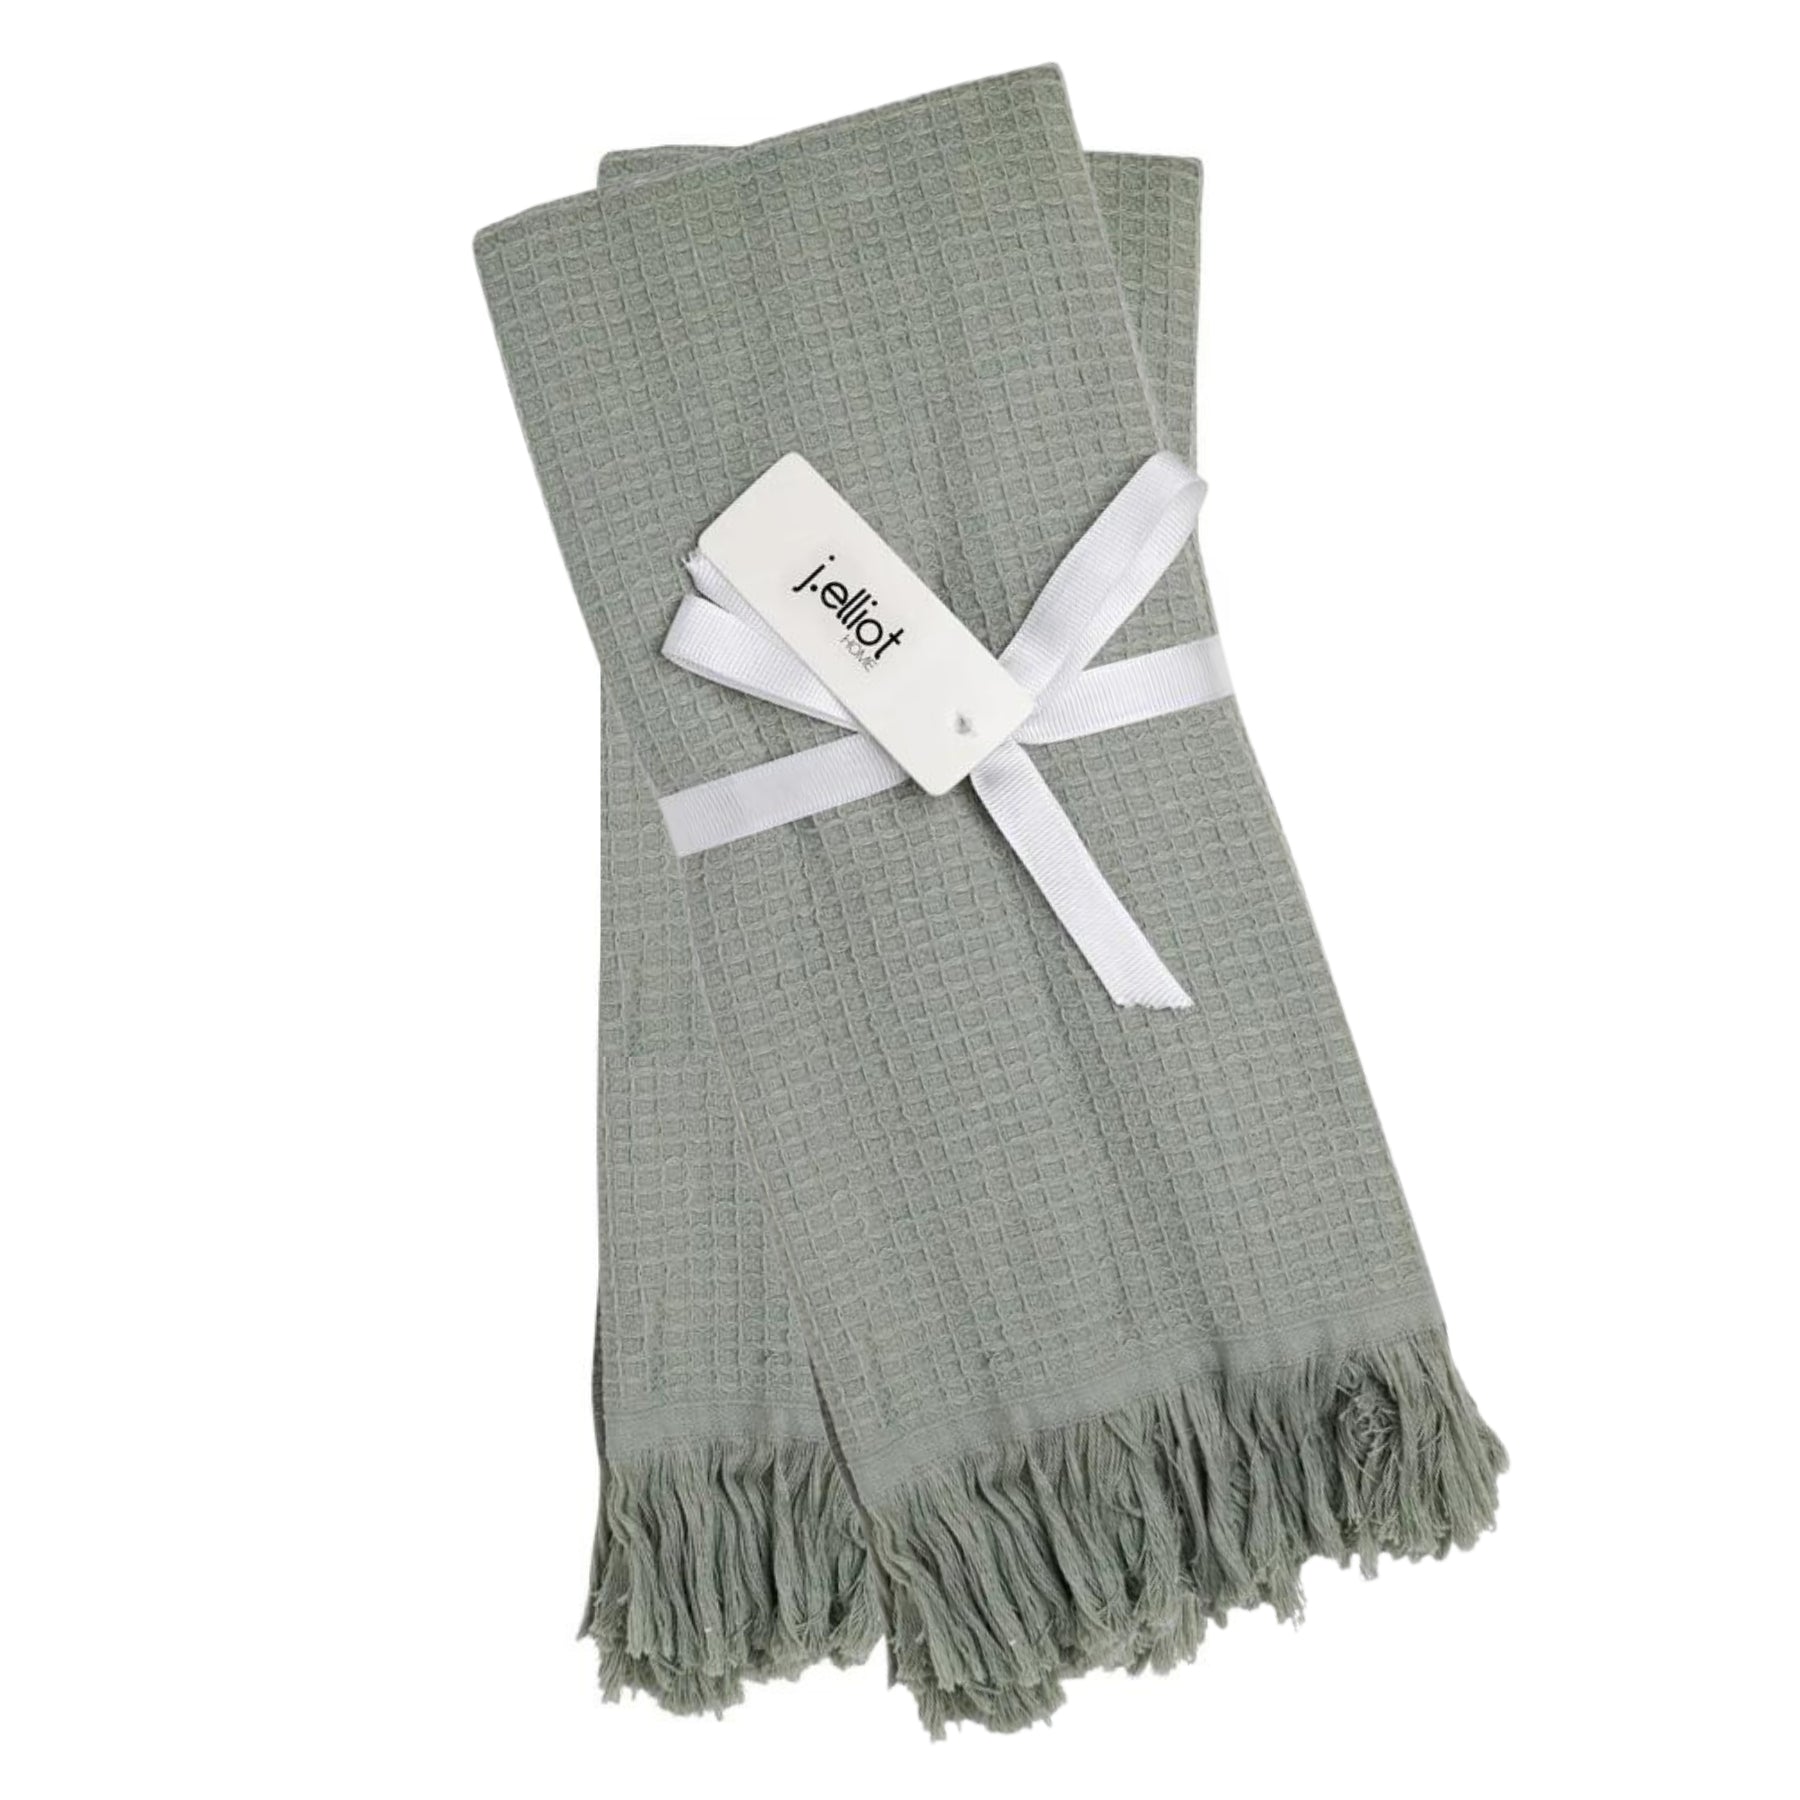 Soft and serene Camila Cotton Waffle Hand Towels in Pistachio with elegant fringe detailing.